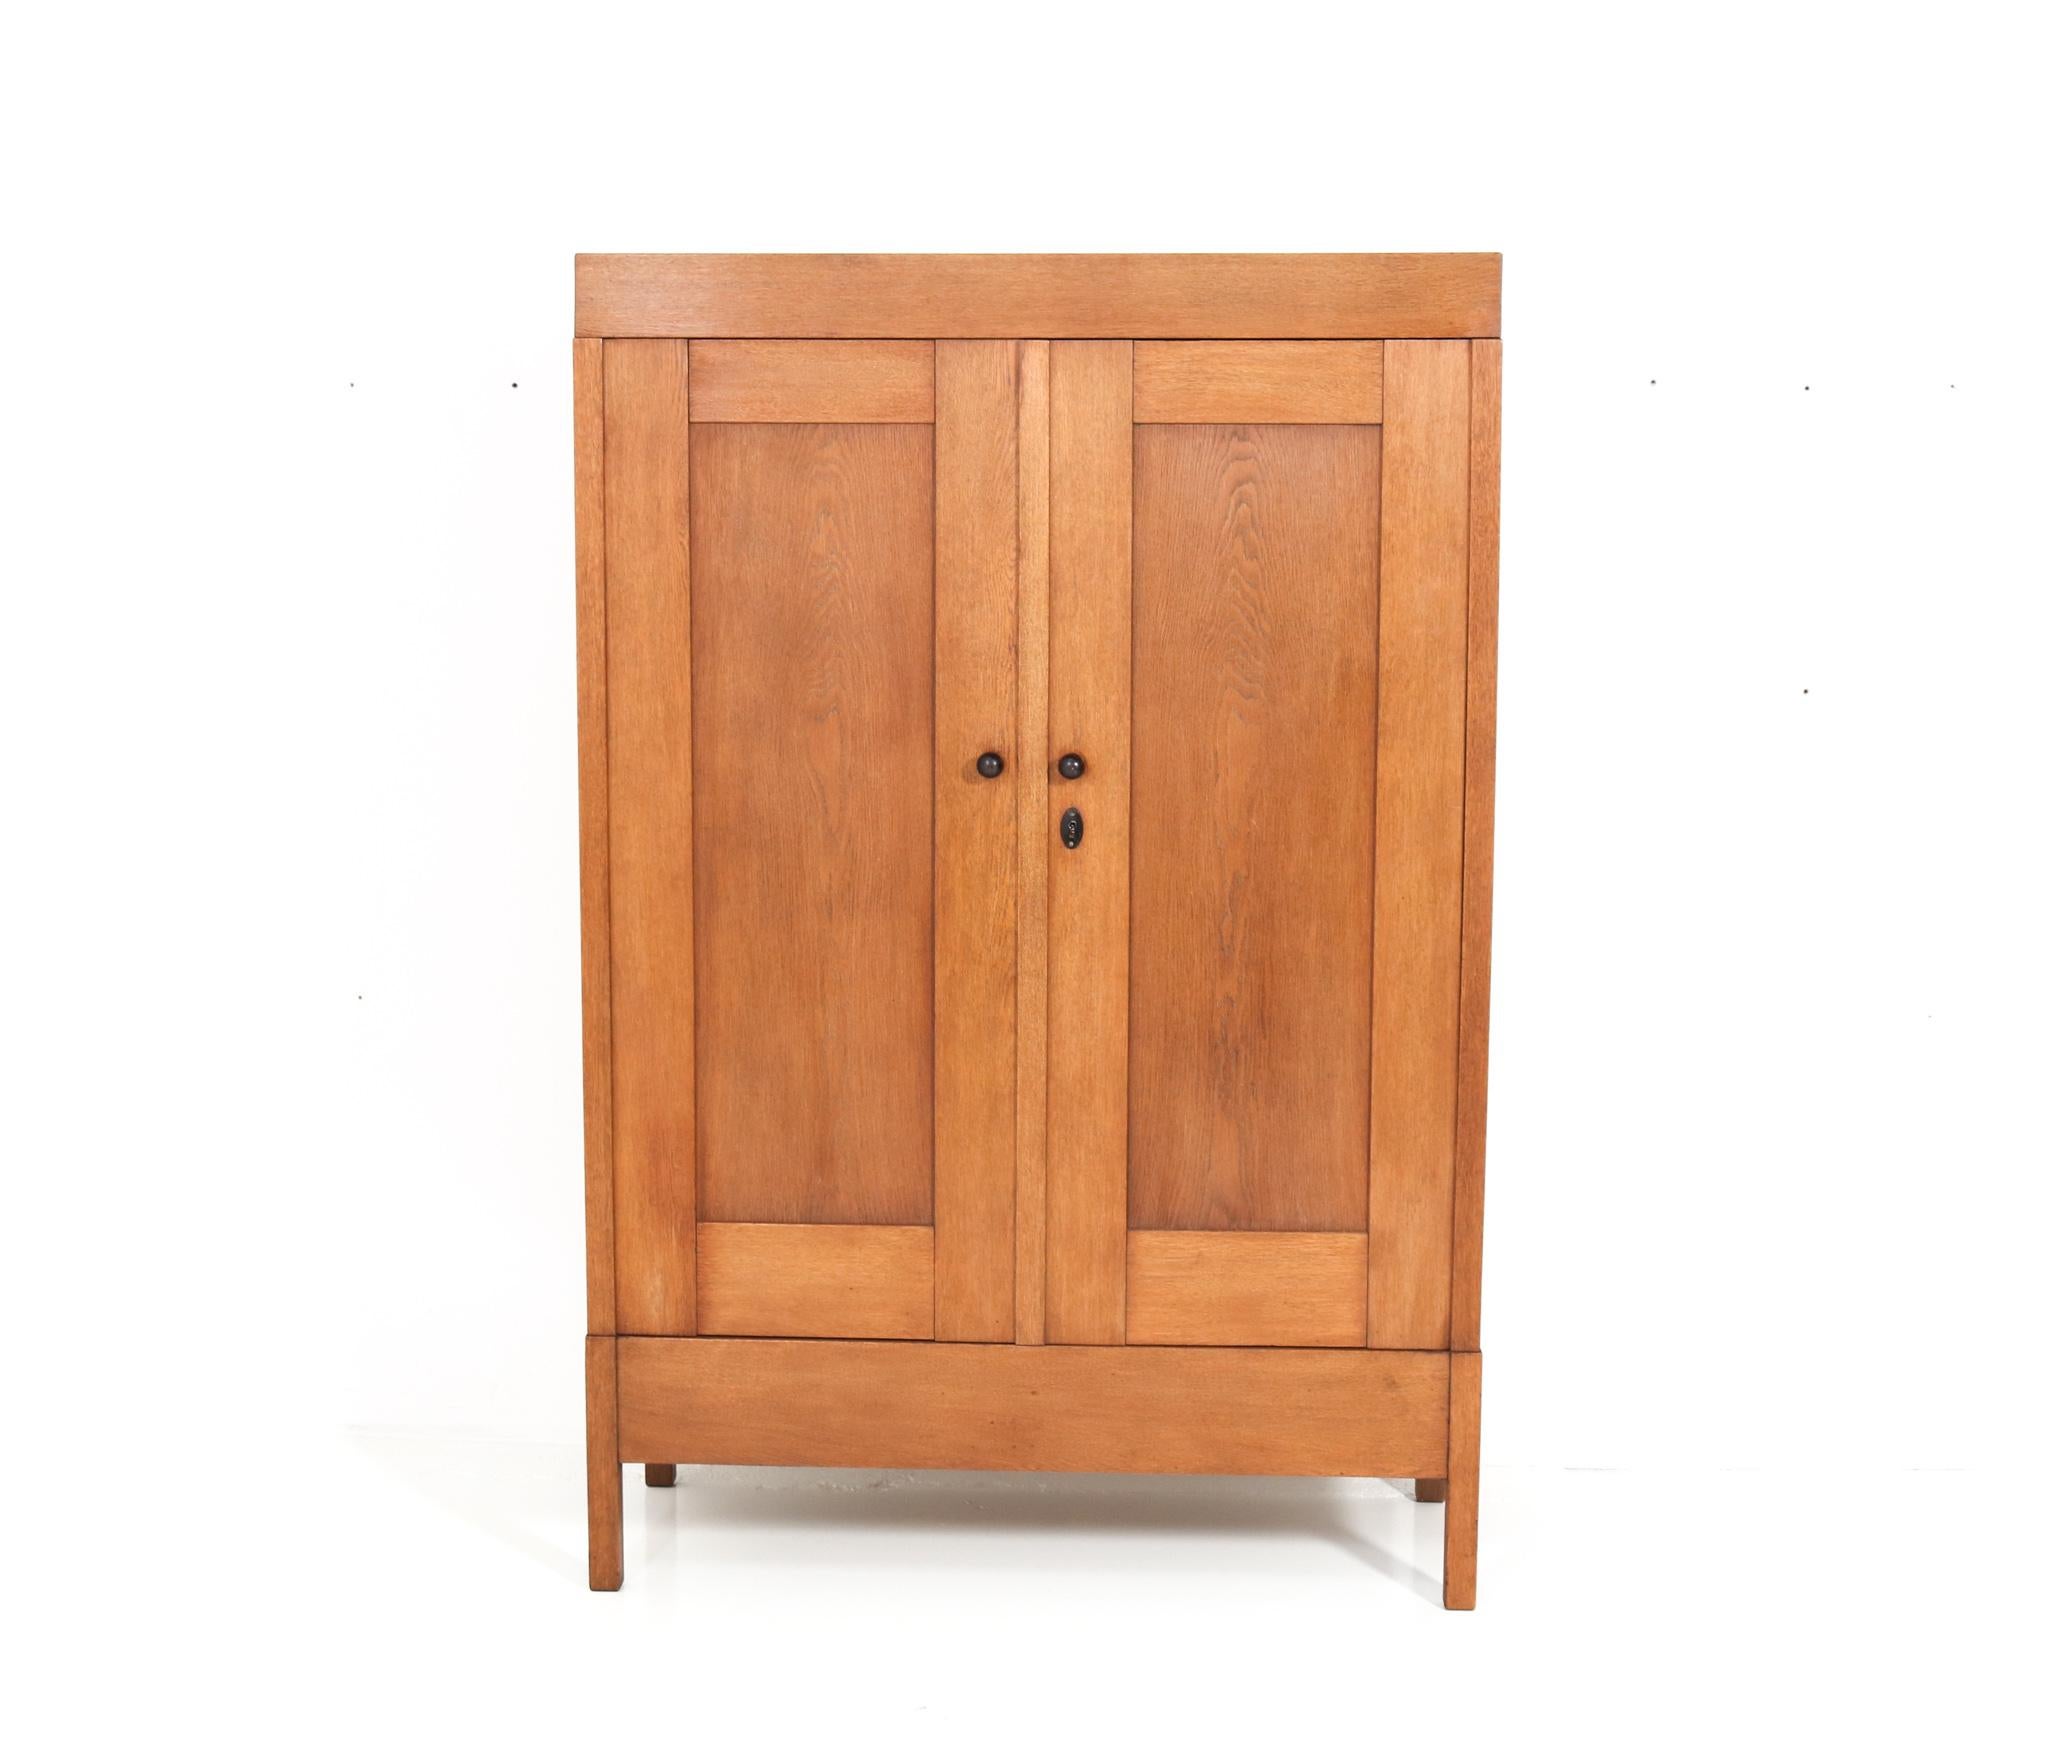 Magnificent and rare Art Deco armoire or wardrobe.
Design by J.A. Muntendam for L.O.V. Oosterbeek.
Striking Dutch Haagse School design from the 1920s.
Solid oak with original solid macassar ebony knobs.
Four original wooden shelves adjustable in